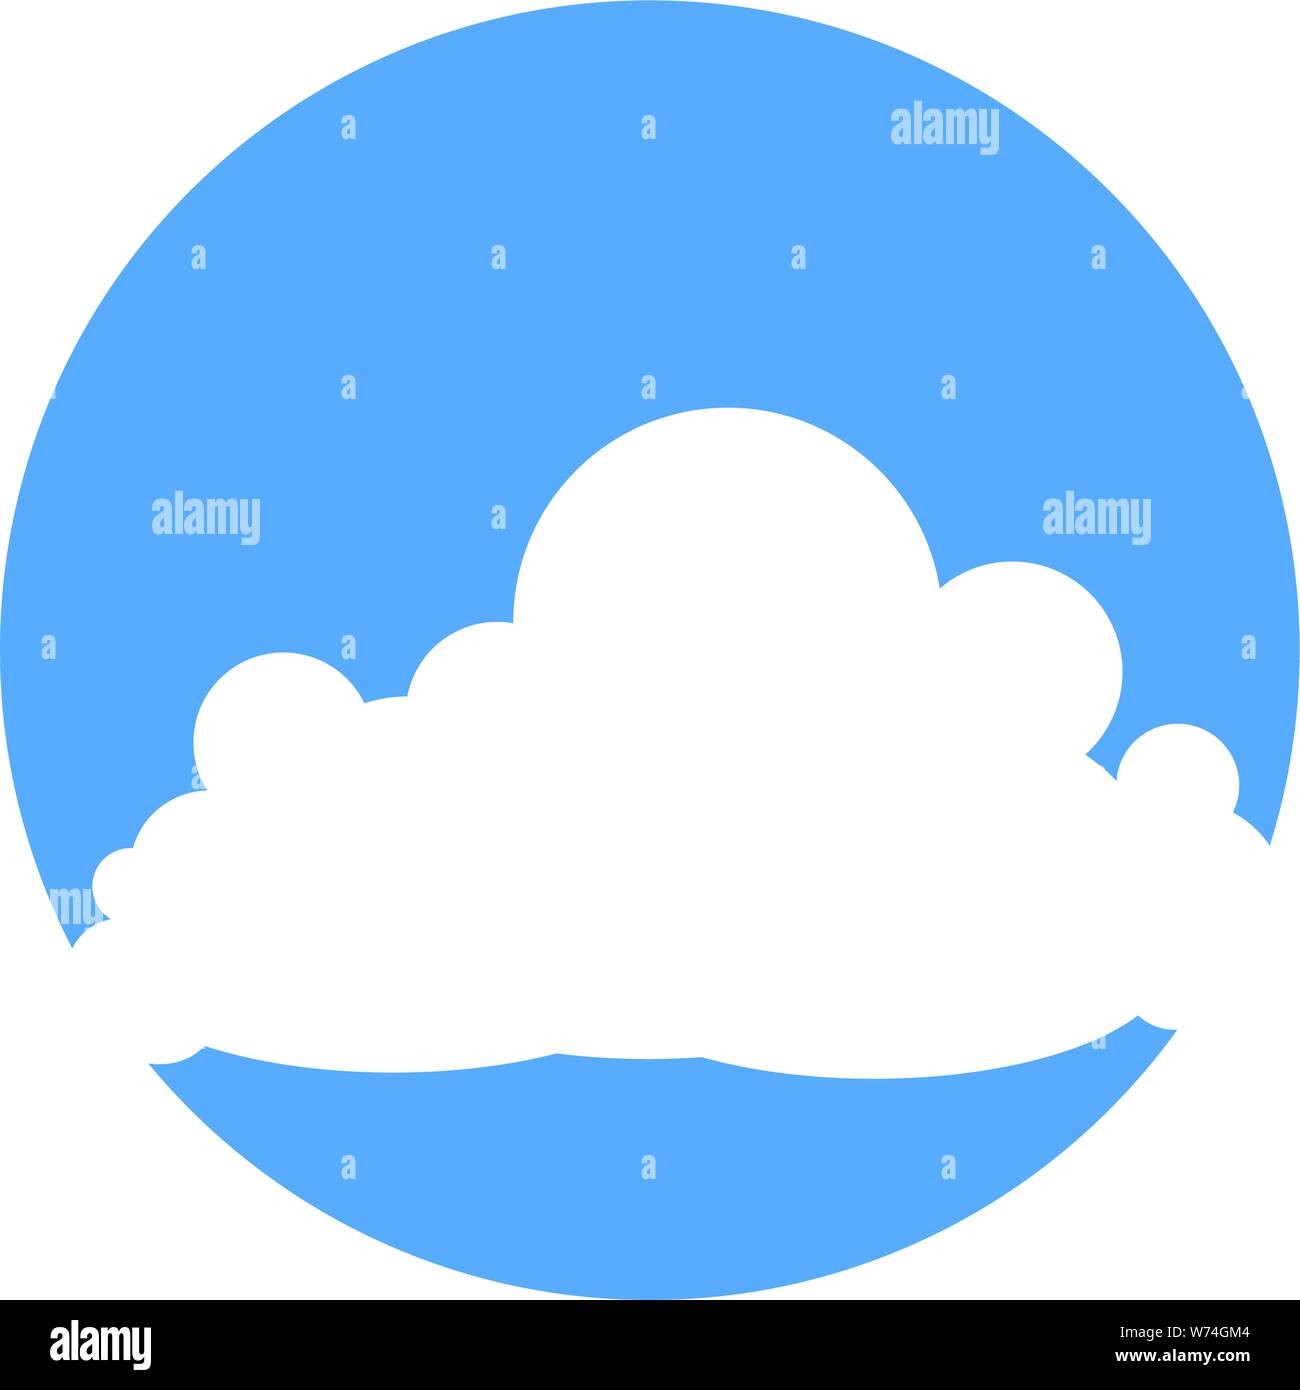 clouds running through a circle graphic symbol Stock Vector